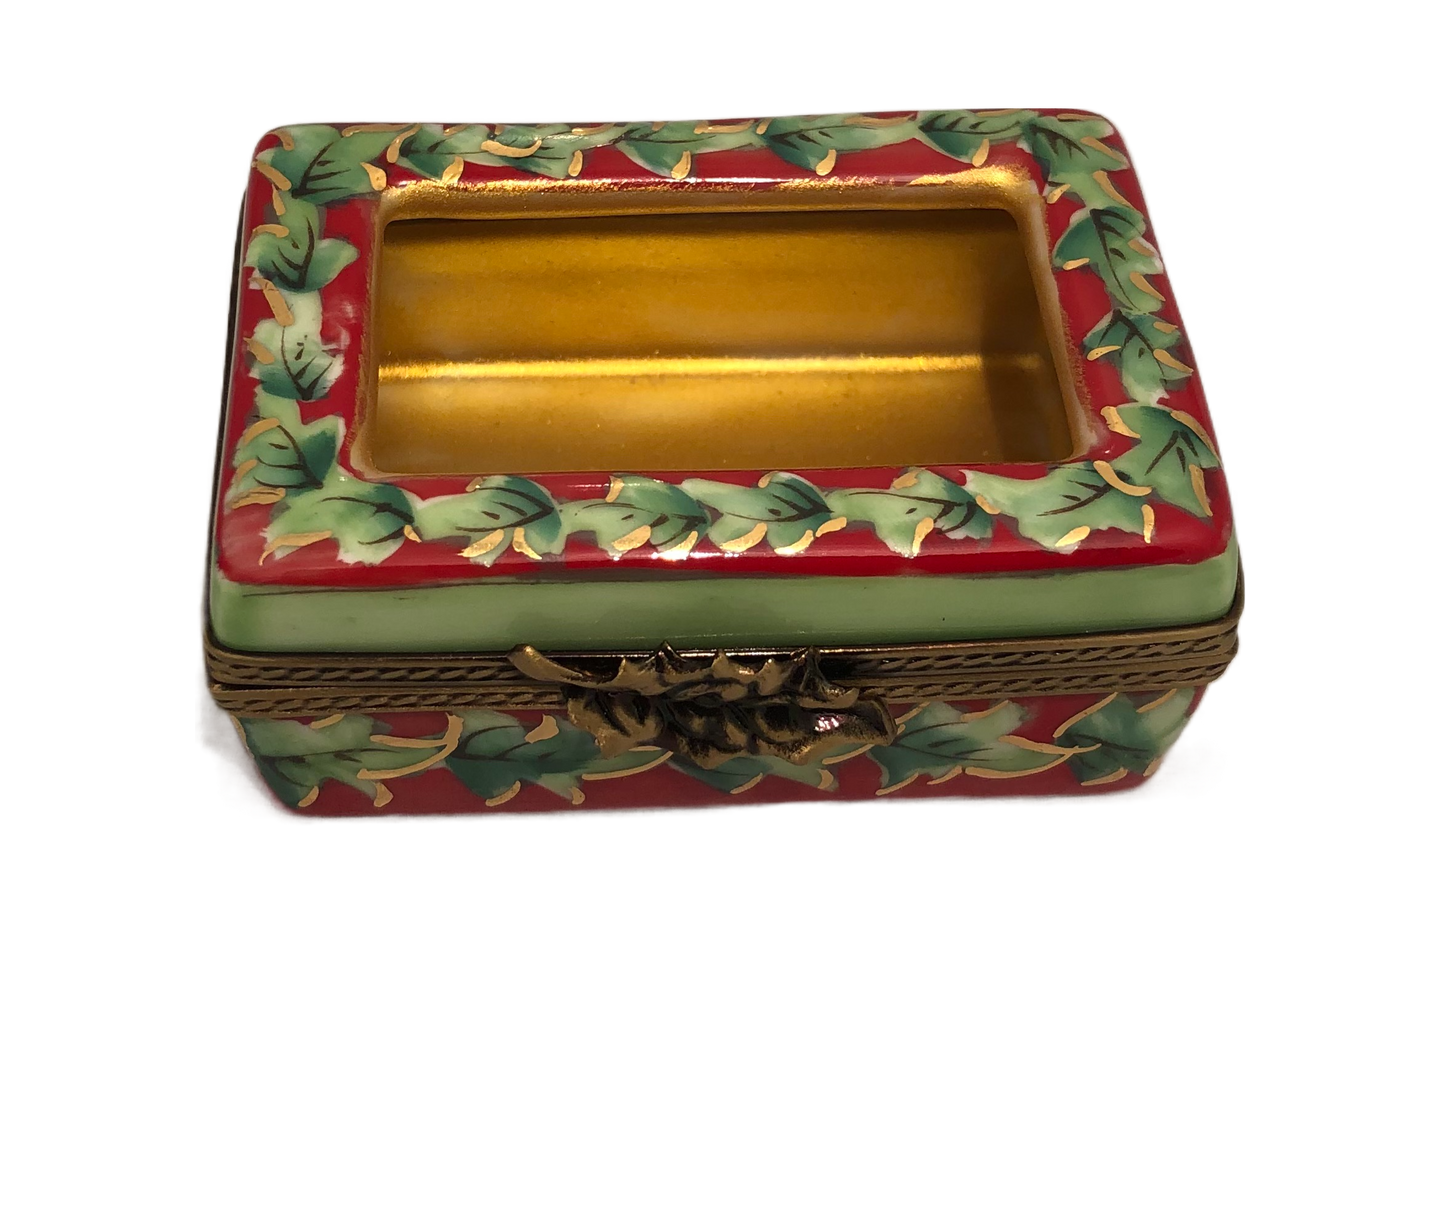 Enchanting Elegance: Hand-Painted Rectangular Limoges Keepsake Box - Red Passion with Delicate Green Vines